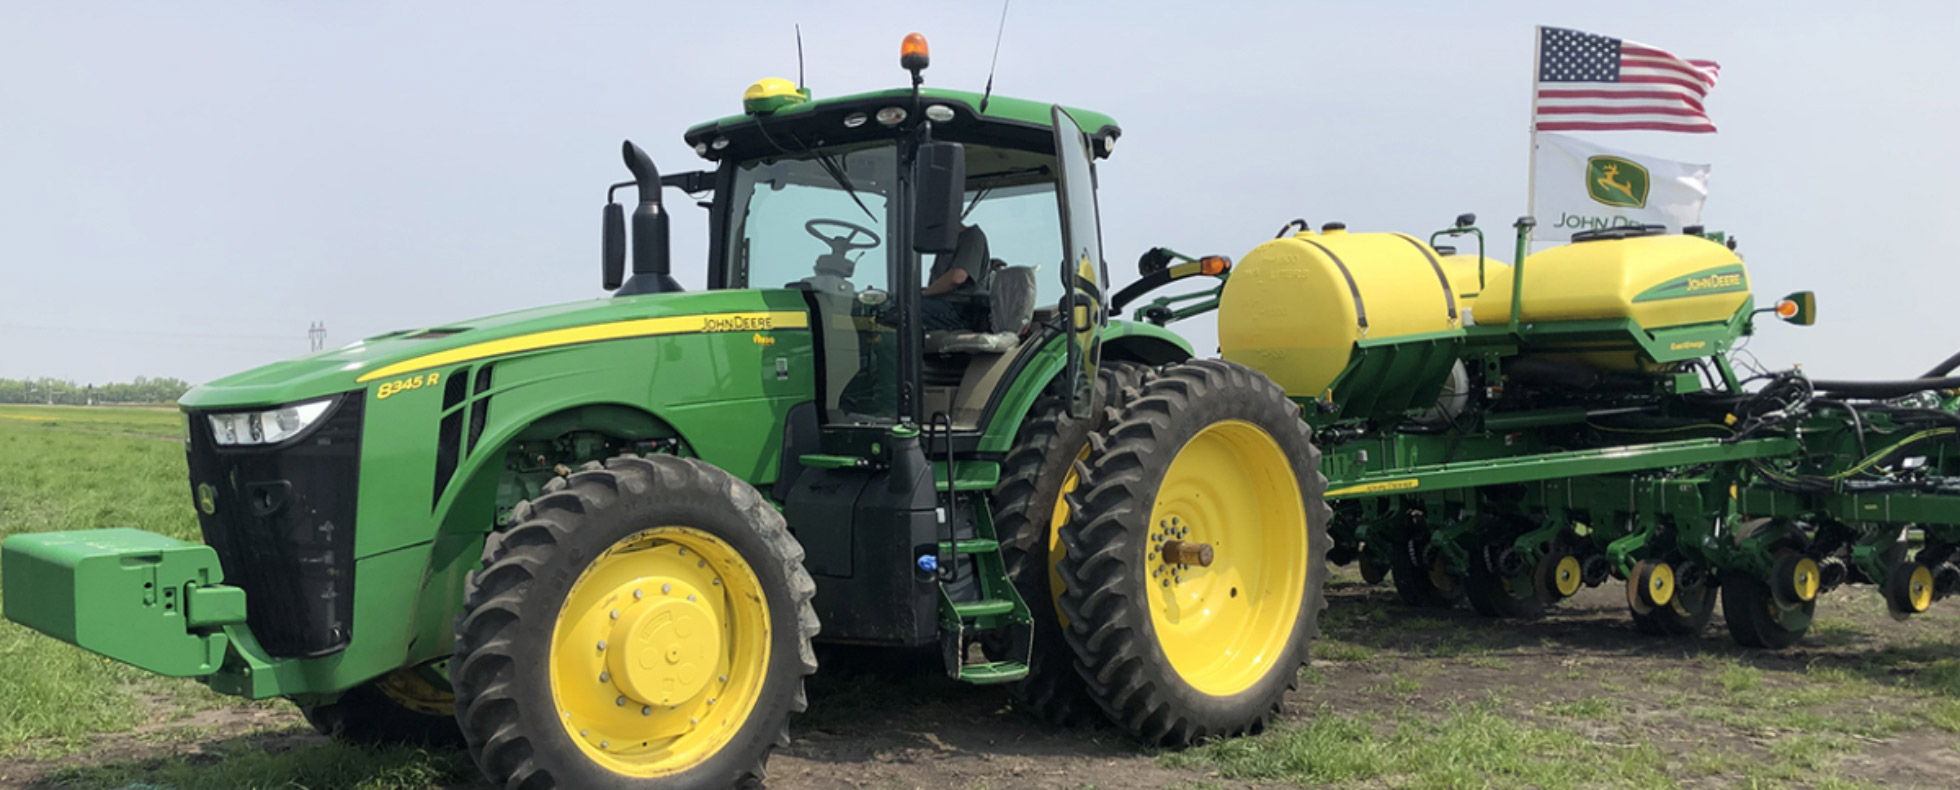 6 Ways to Evaluate Equipment Demonstrations from Your Dealer Partner